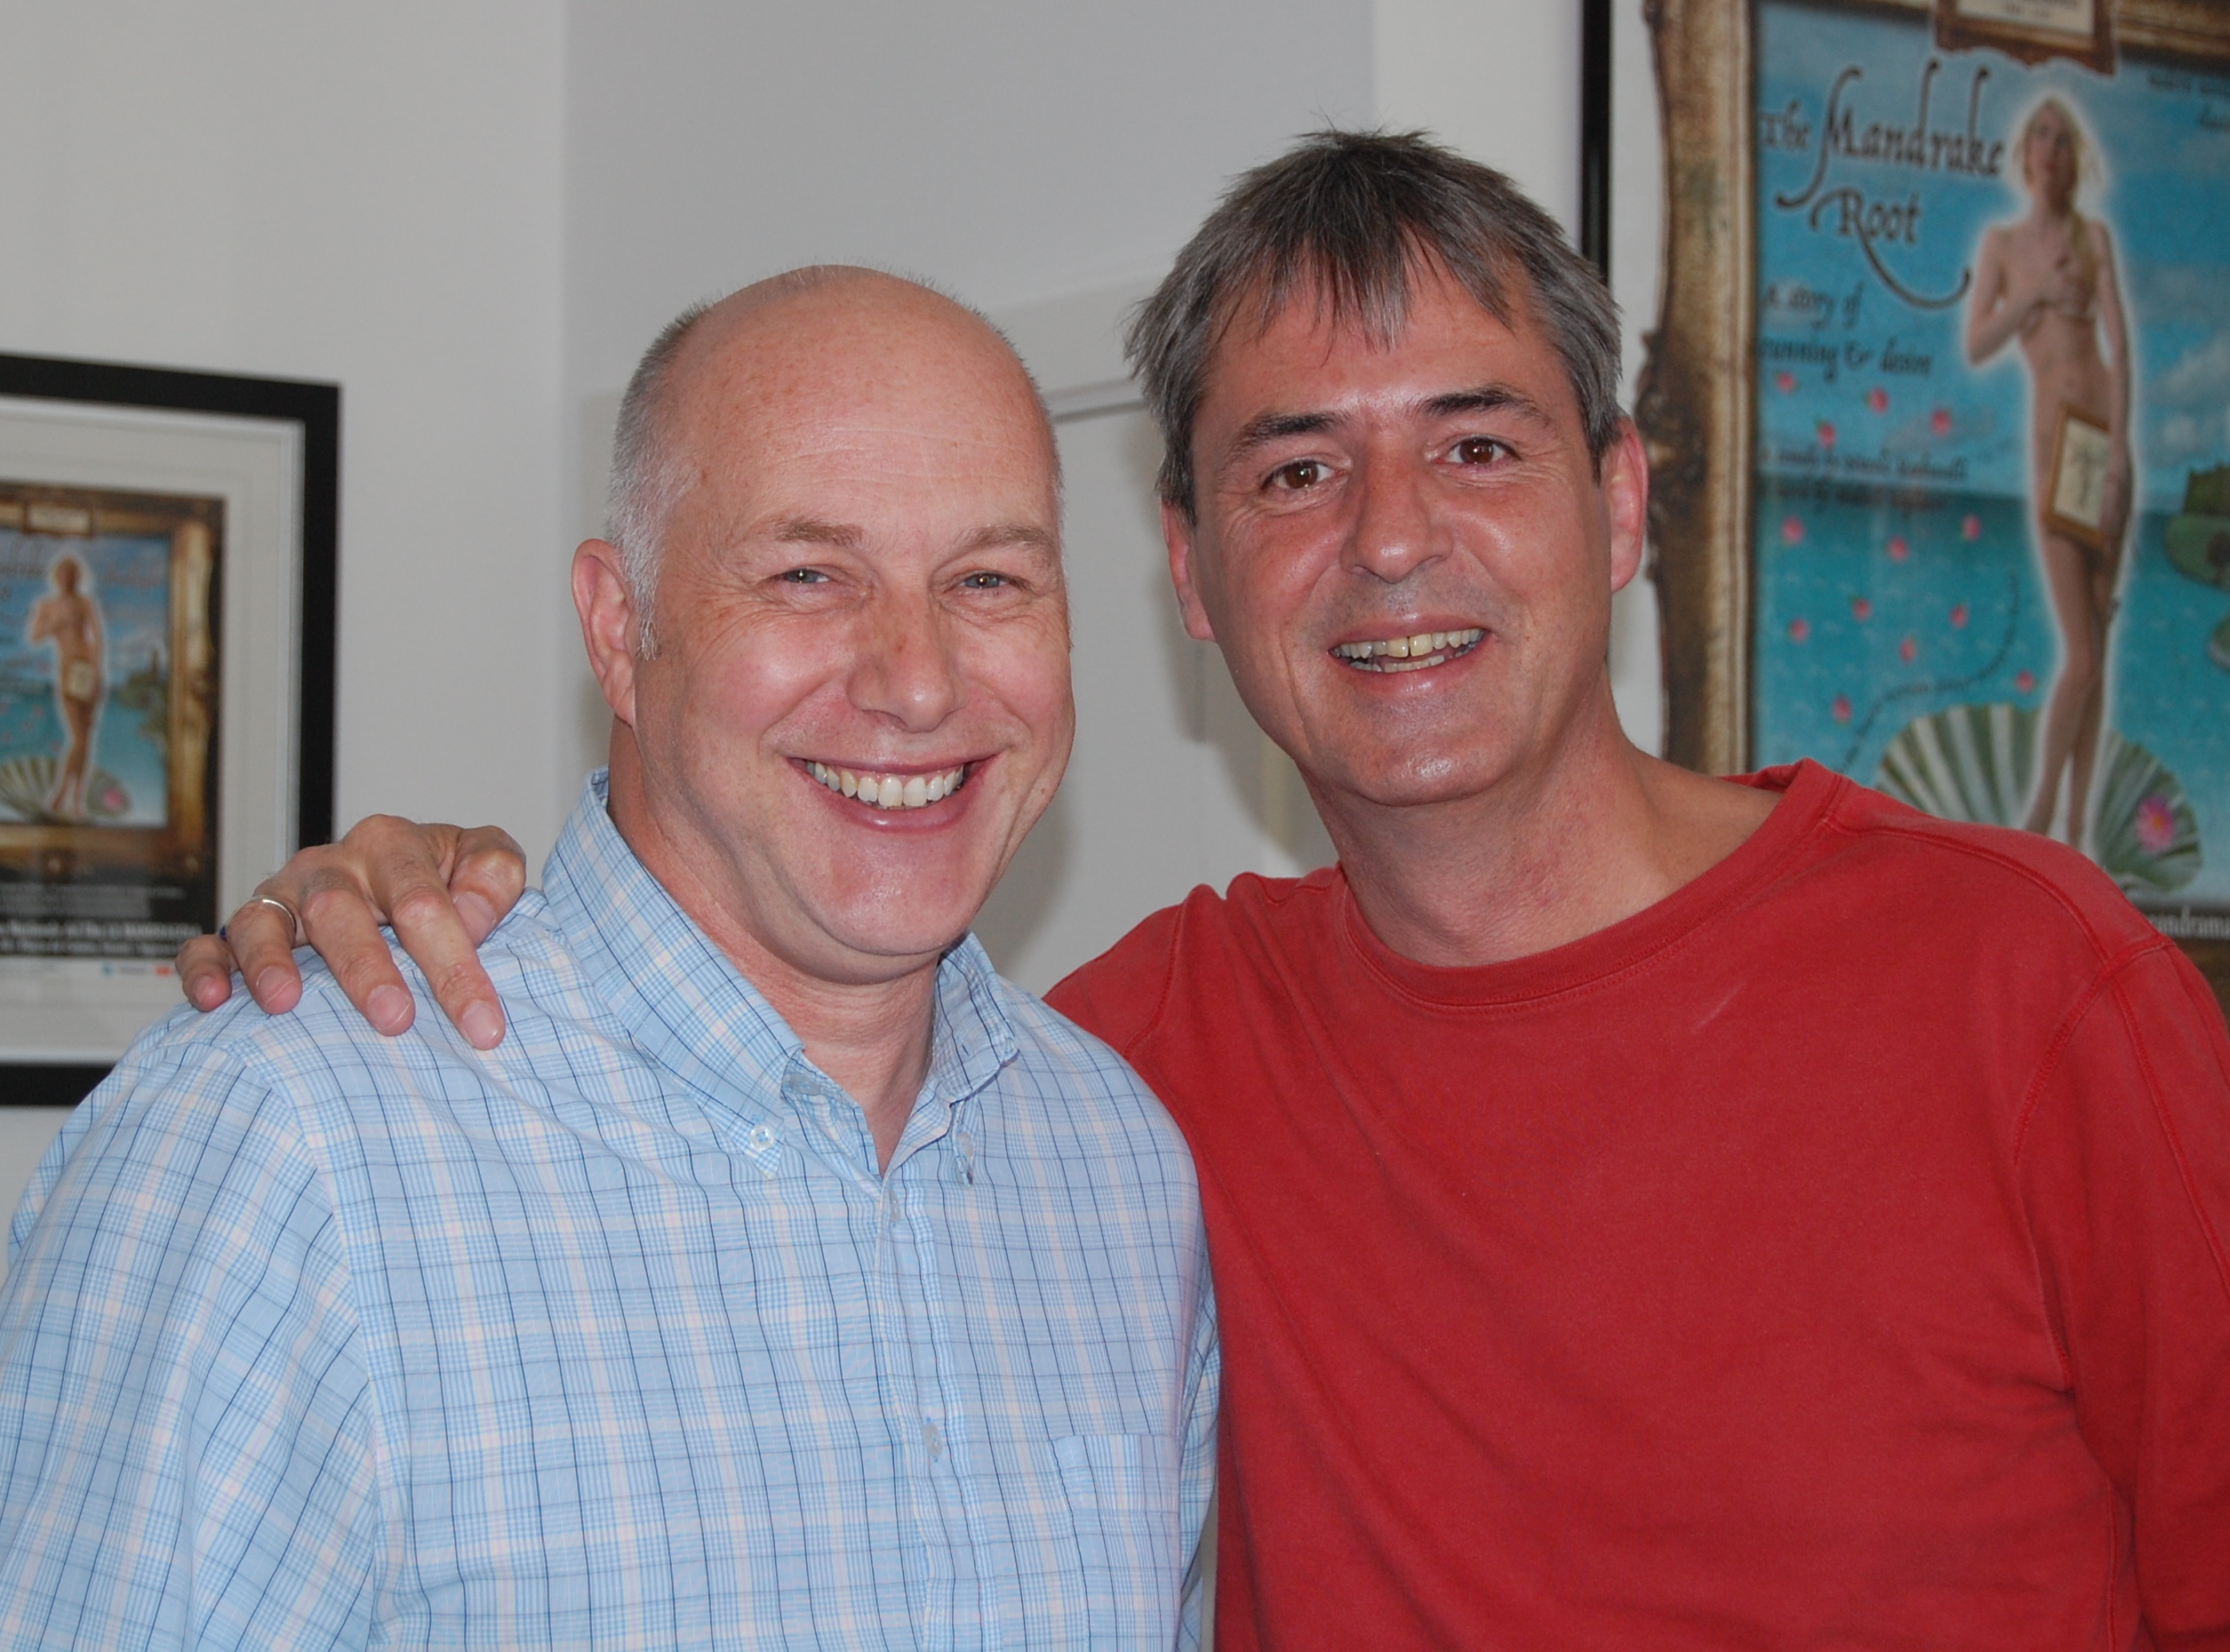 Neil Hillman MPSE with Neil Morrissey at The Audio Suite for the recording of the Tesco radio / TV/ Cinema commercial 